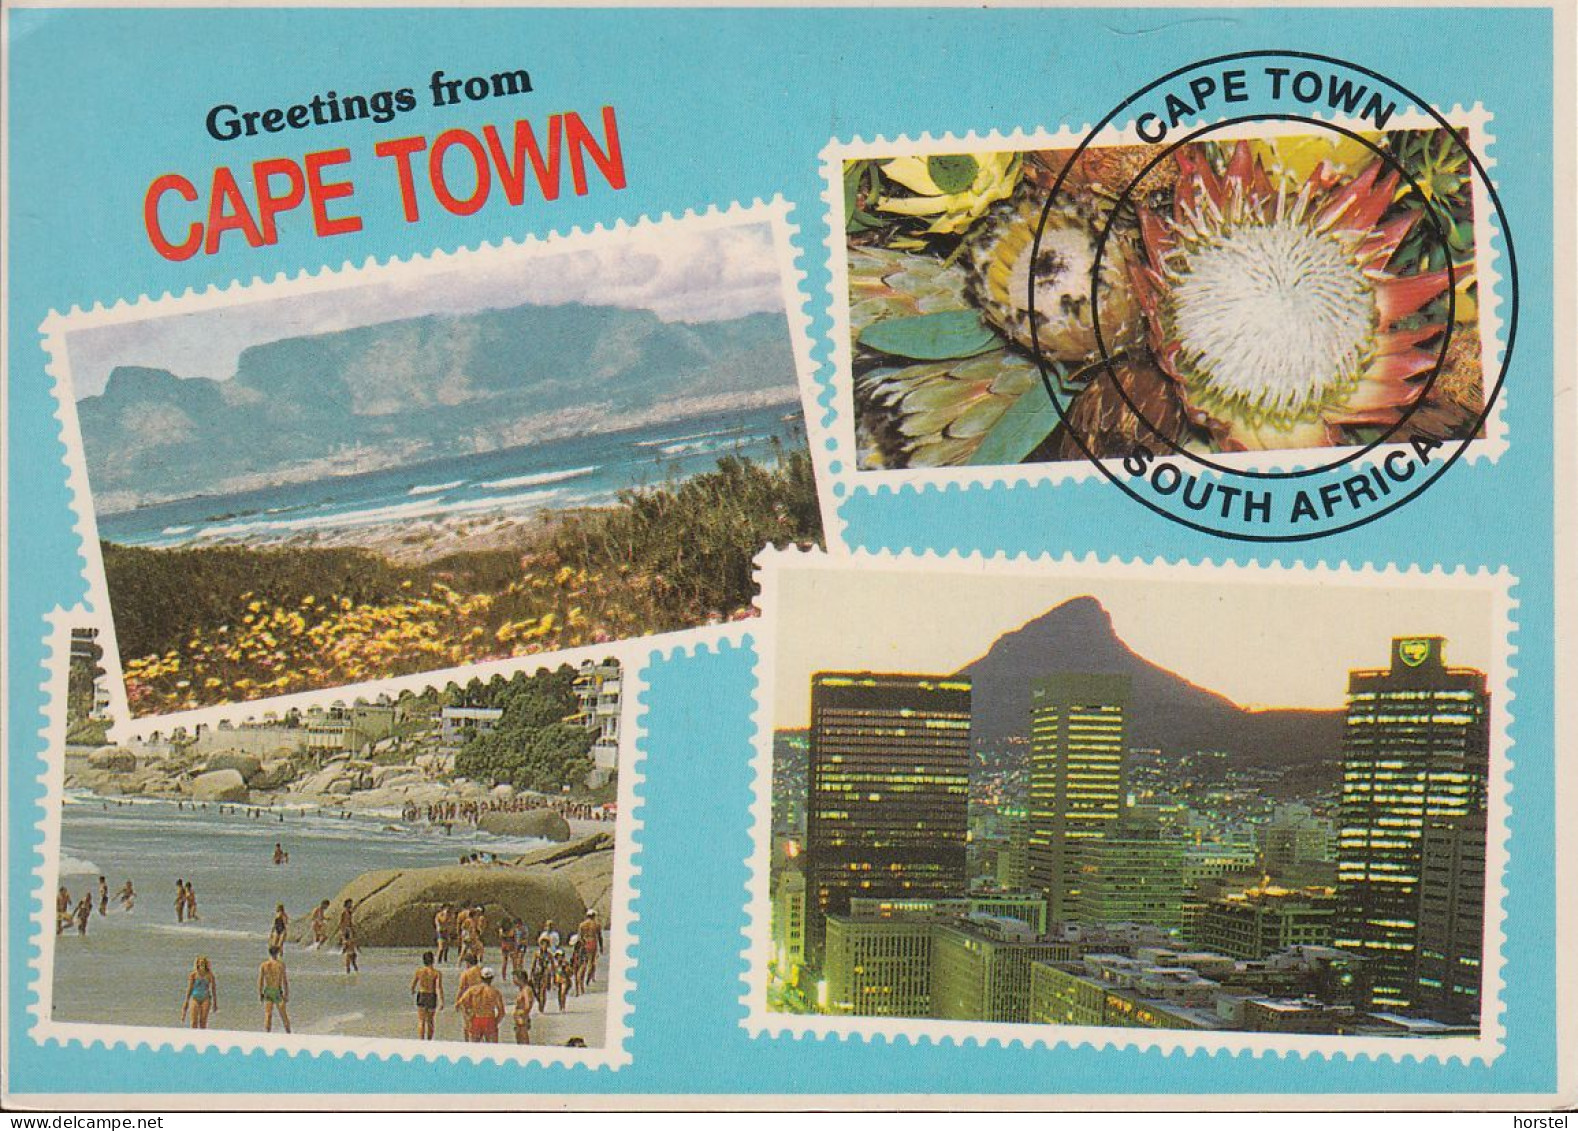 South Africa - Cape Town - Four Views - 2x Nice Stamp - South Africa